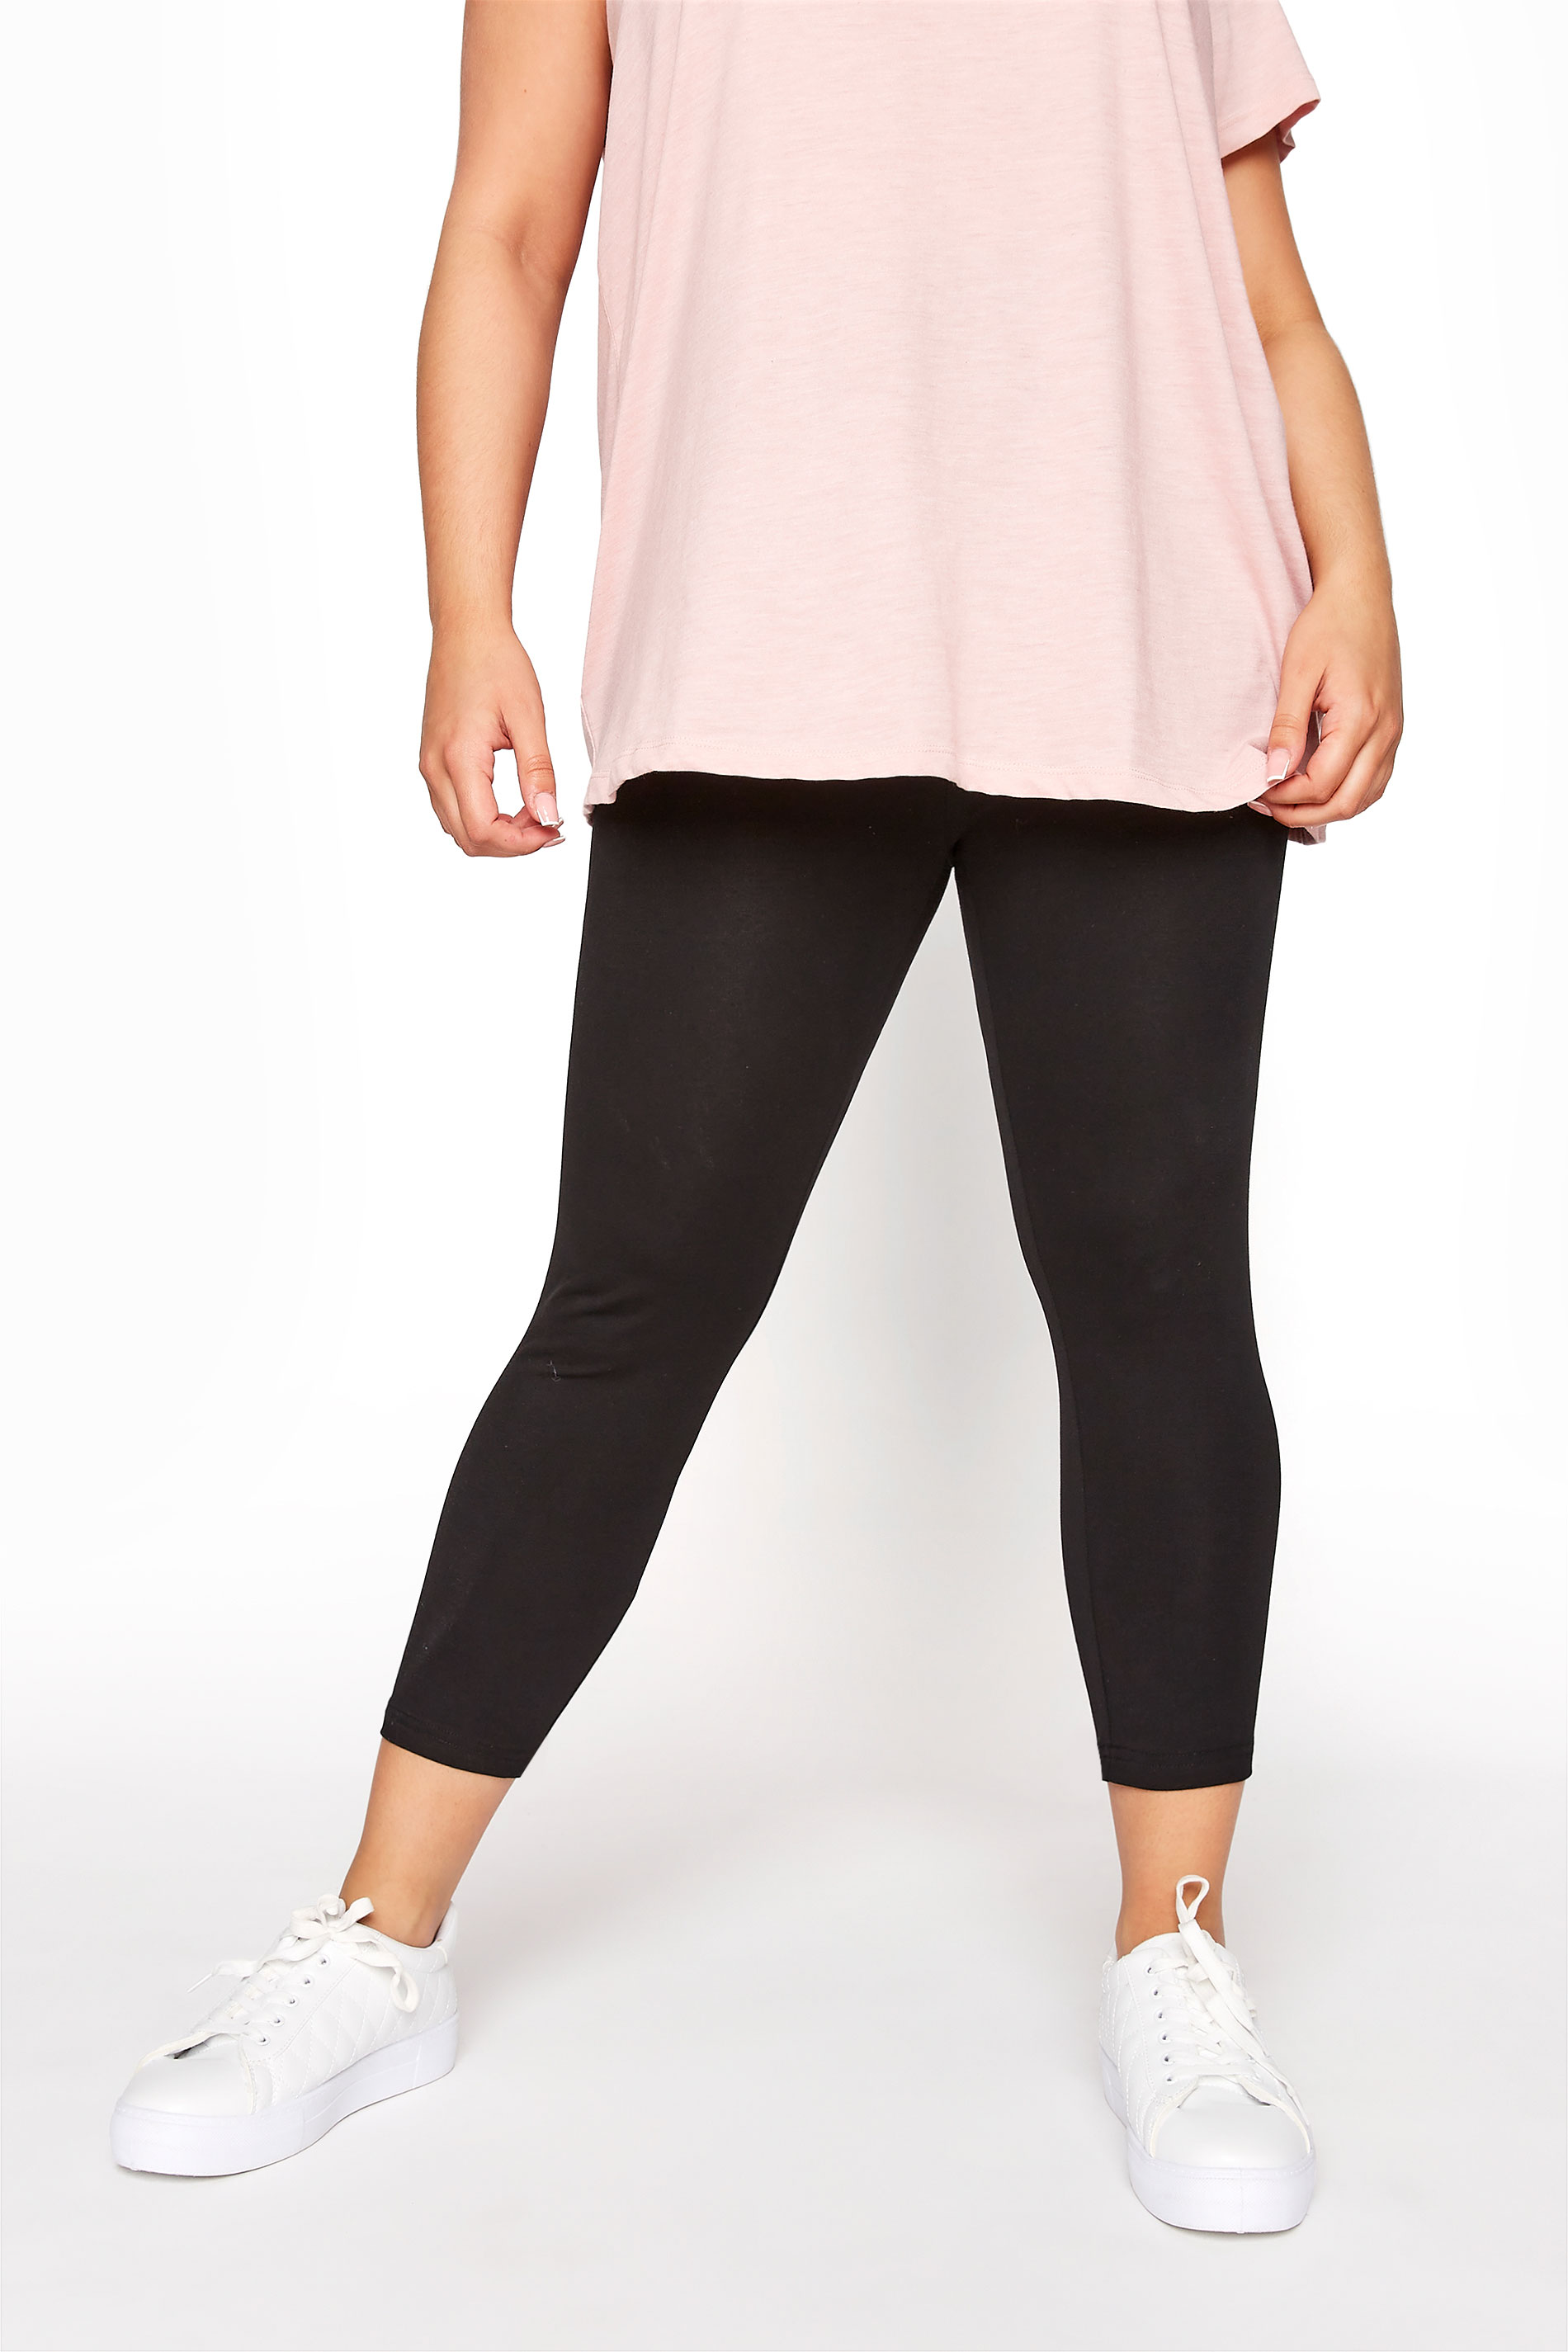 Black Cotton Essential Cropped Leggings plus Size 16 to 32 | Yours Clothing